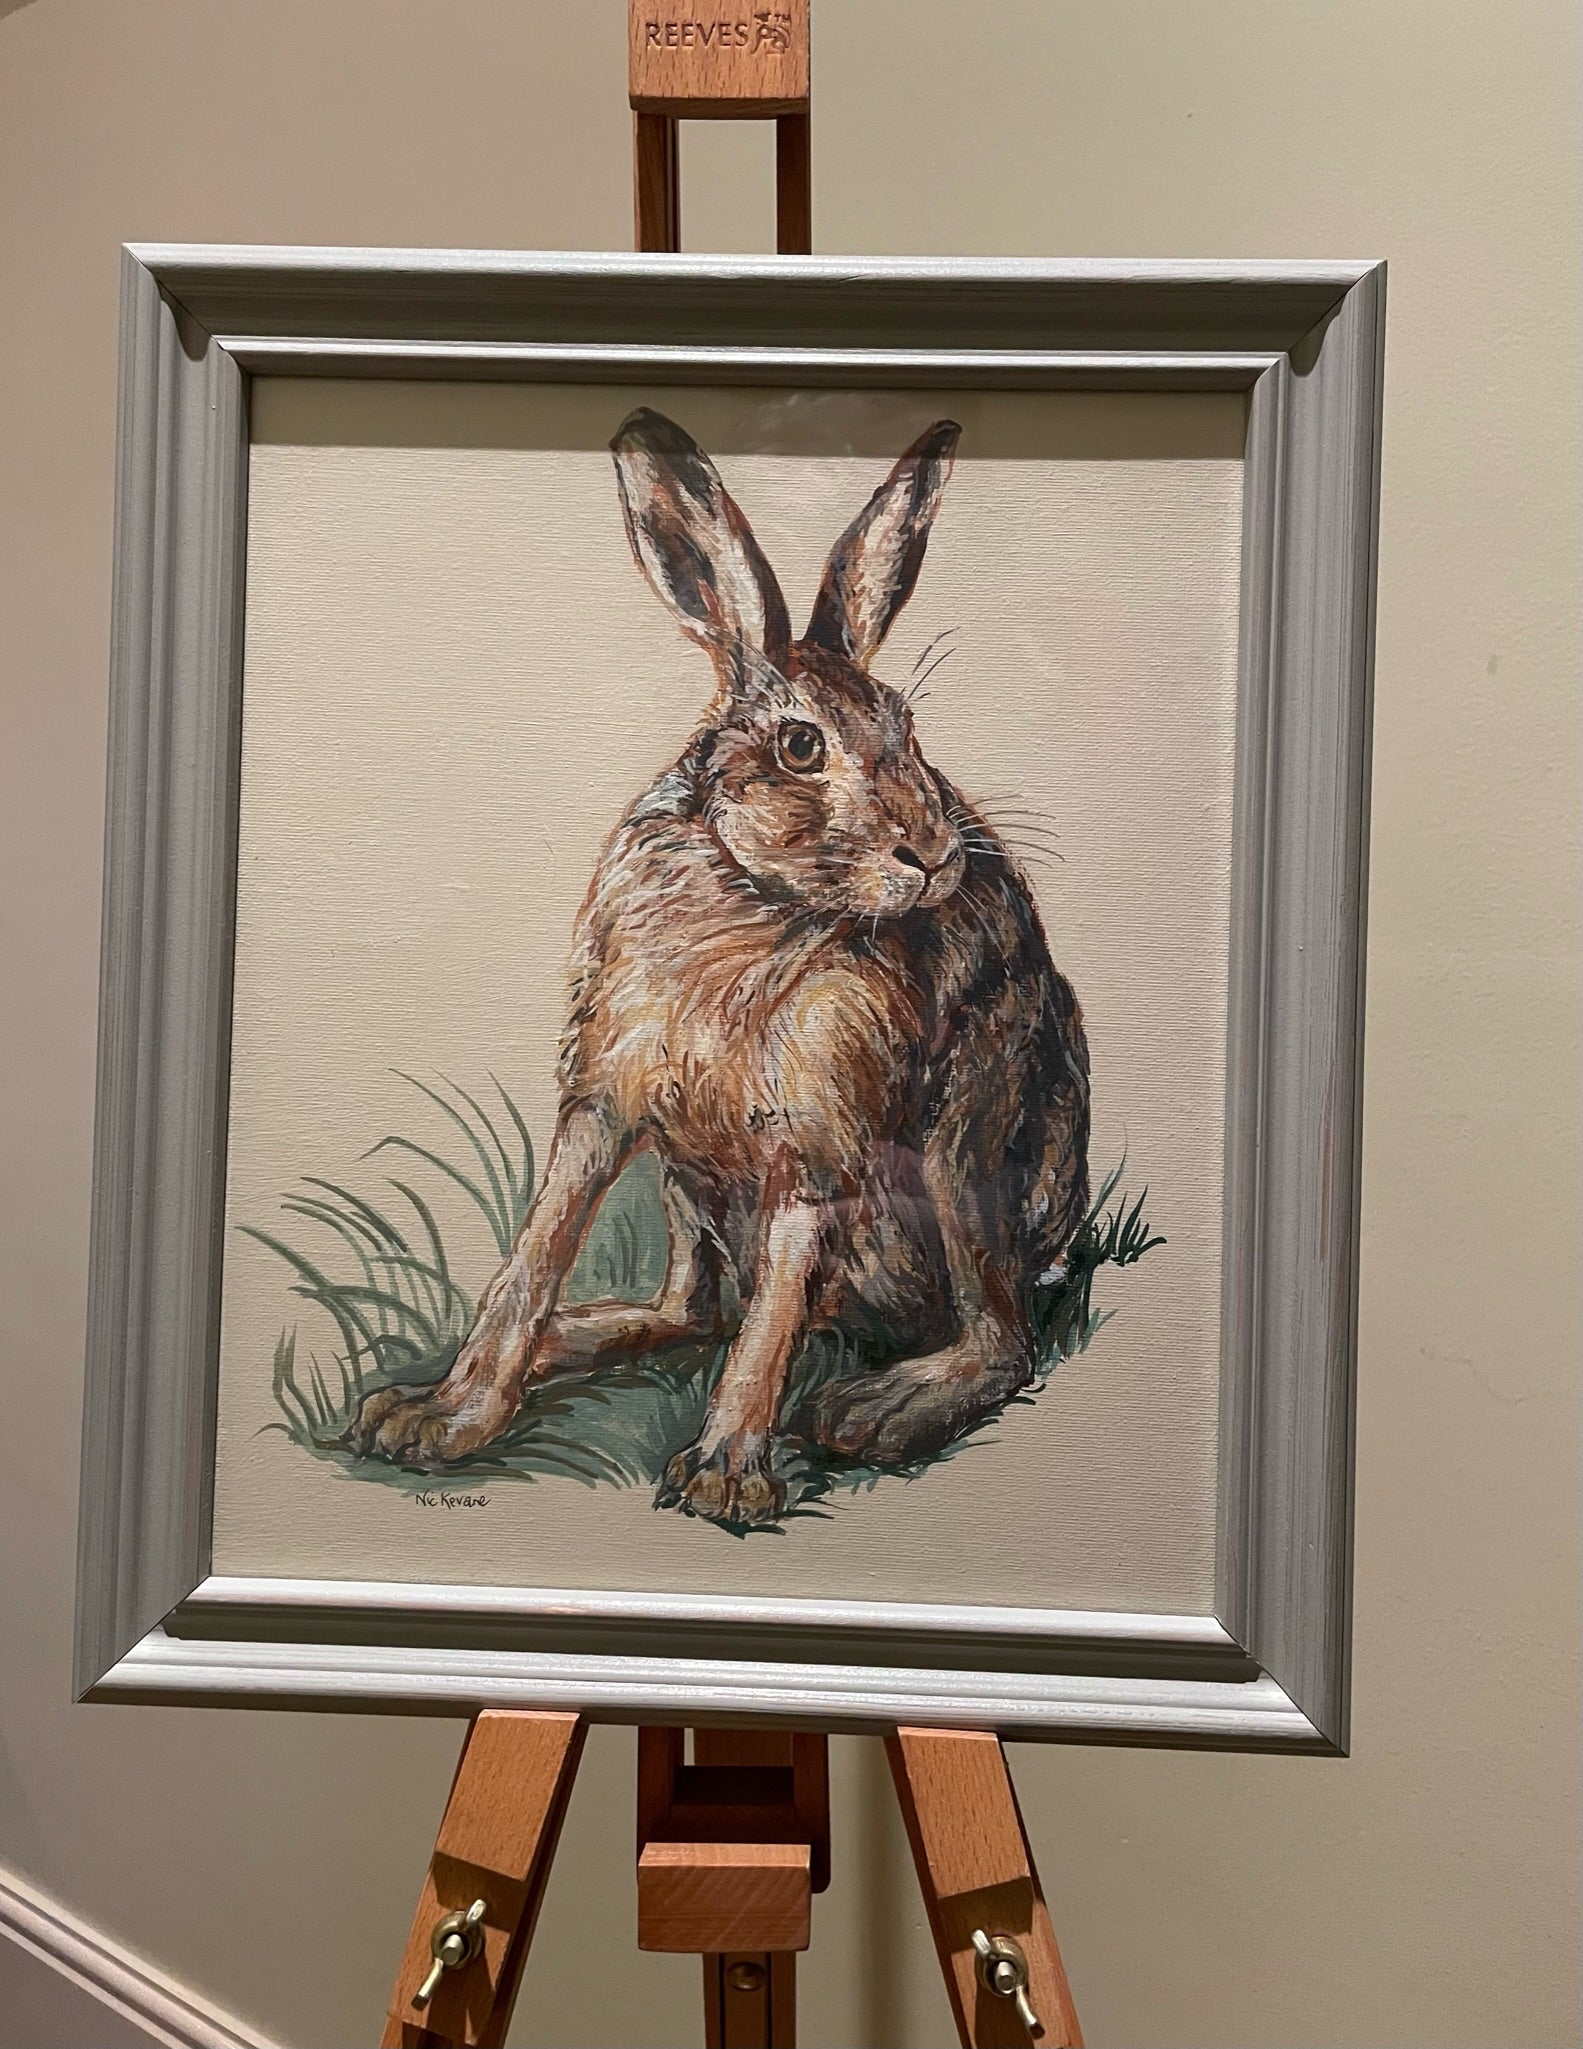 This painting is of a hare about to dash off after being discovered in the field.  The background colour of the painting is a soft off-white.